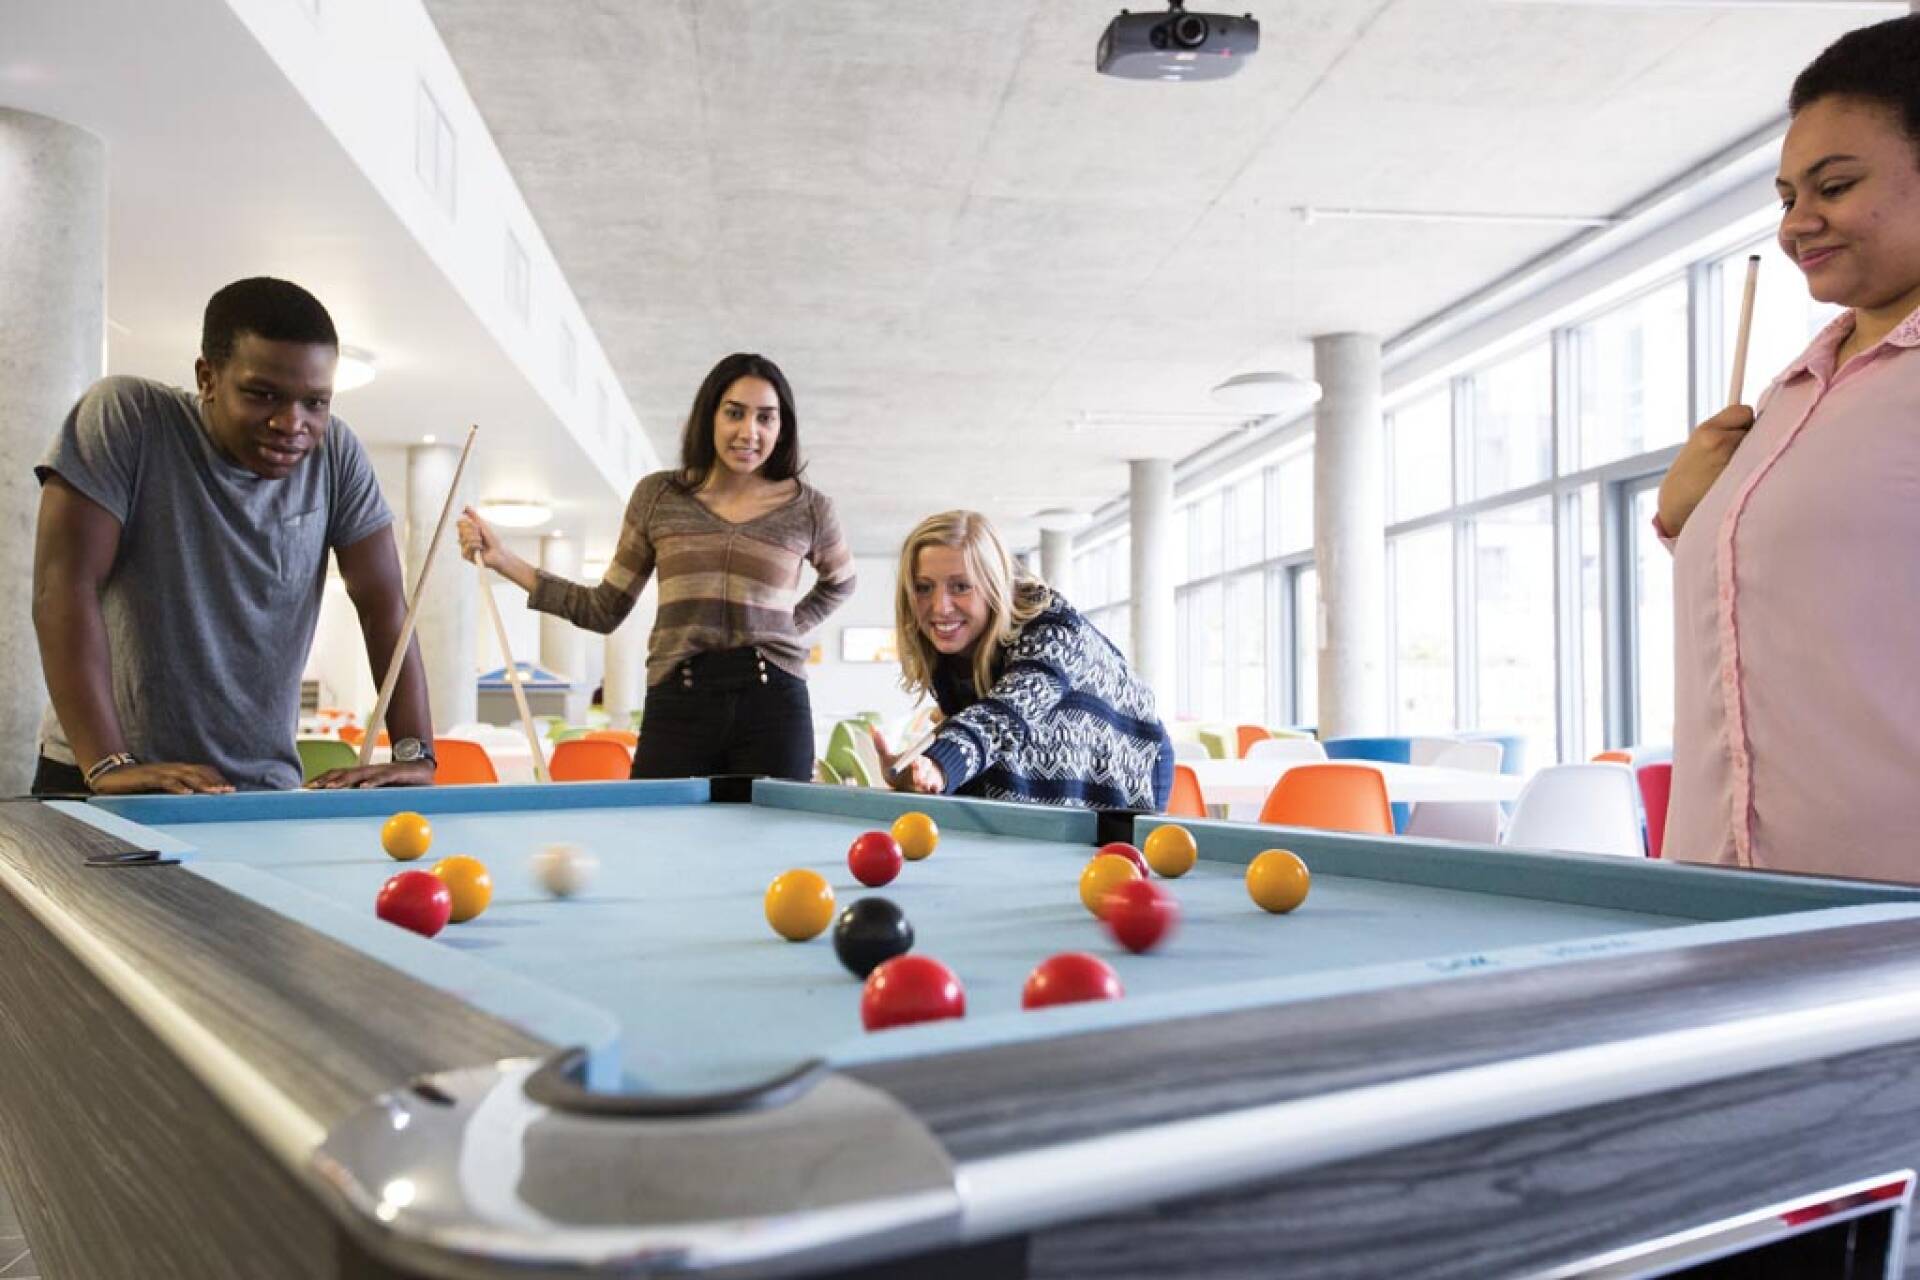 Students around a pool table